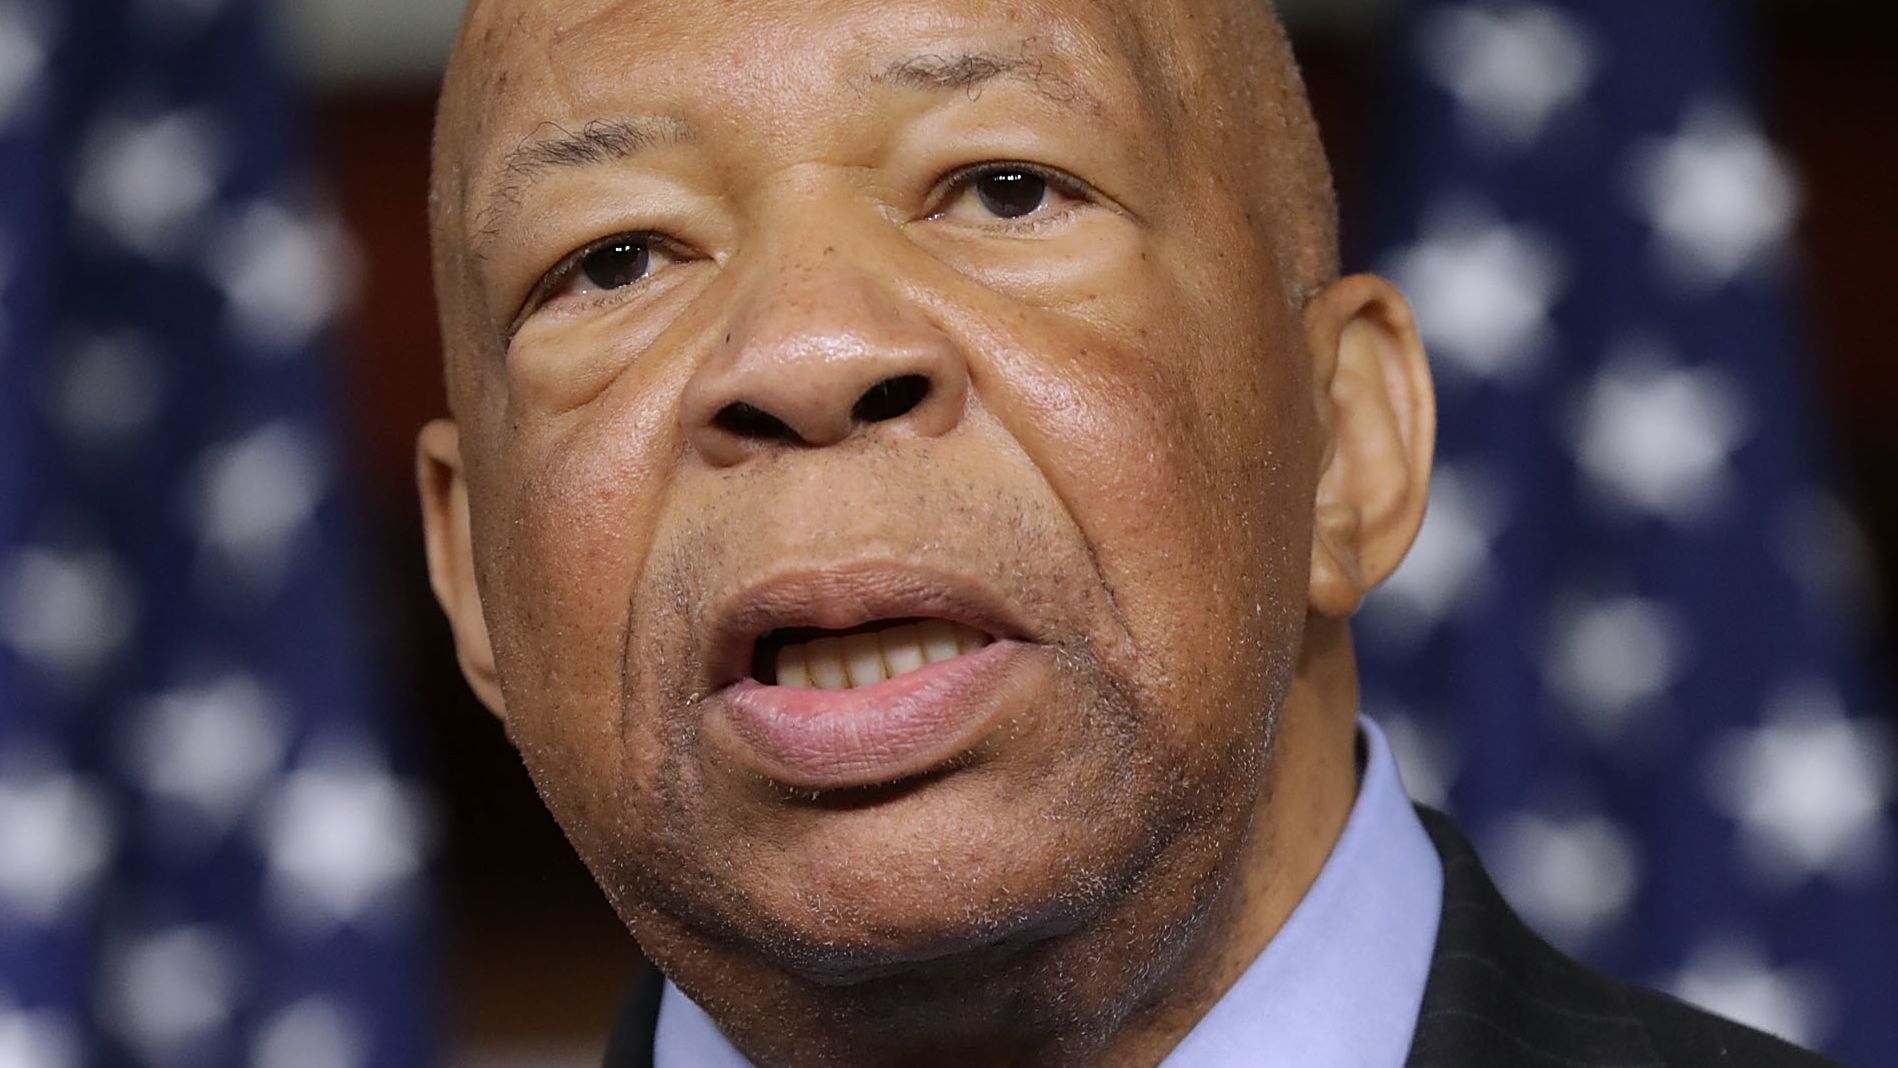 House Oversight and Government Reform Committee ranking member Rep. Elijah Cummings (D-MD) speaks during a news conference at the U.S. Capitol May 17, 2017 in Washington, DC.